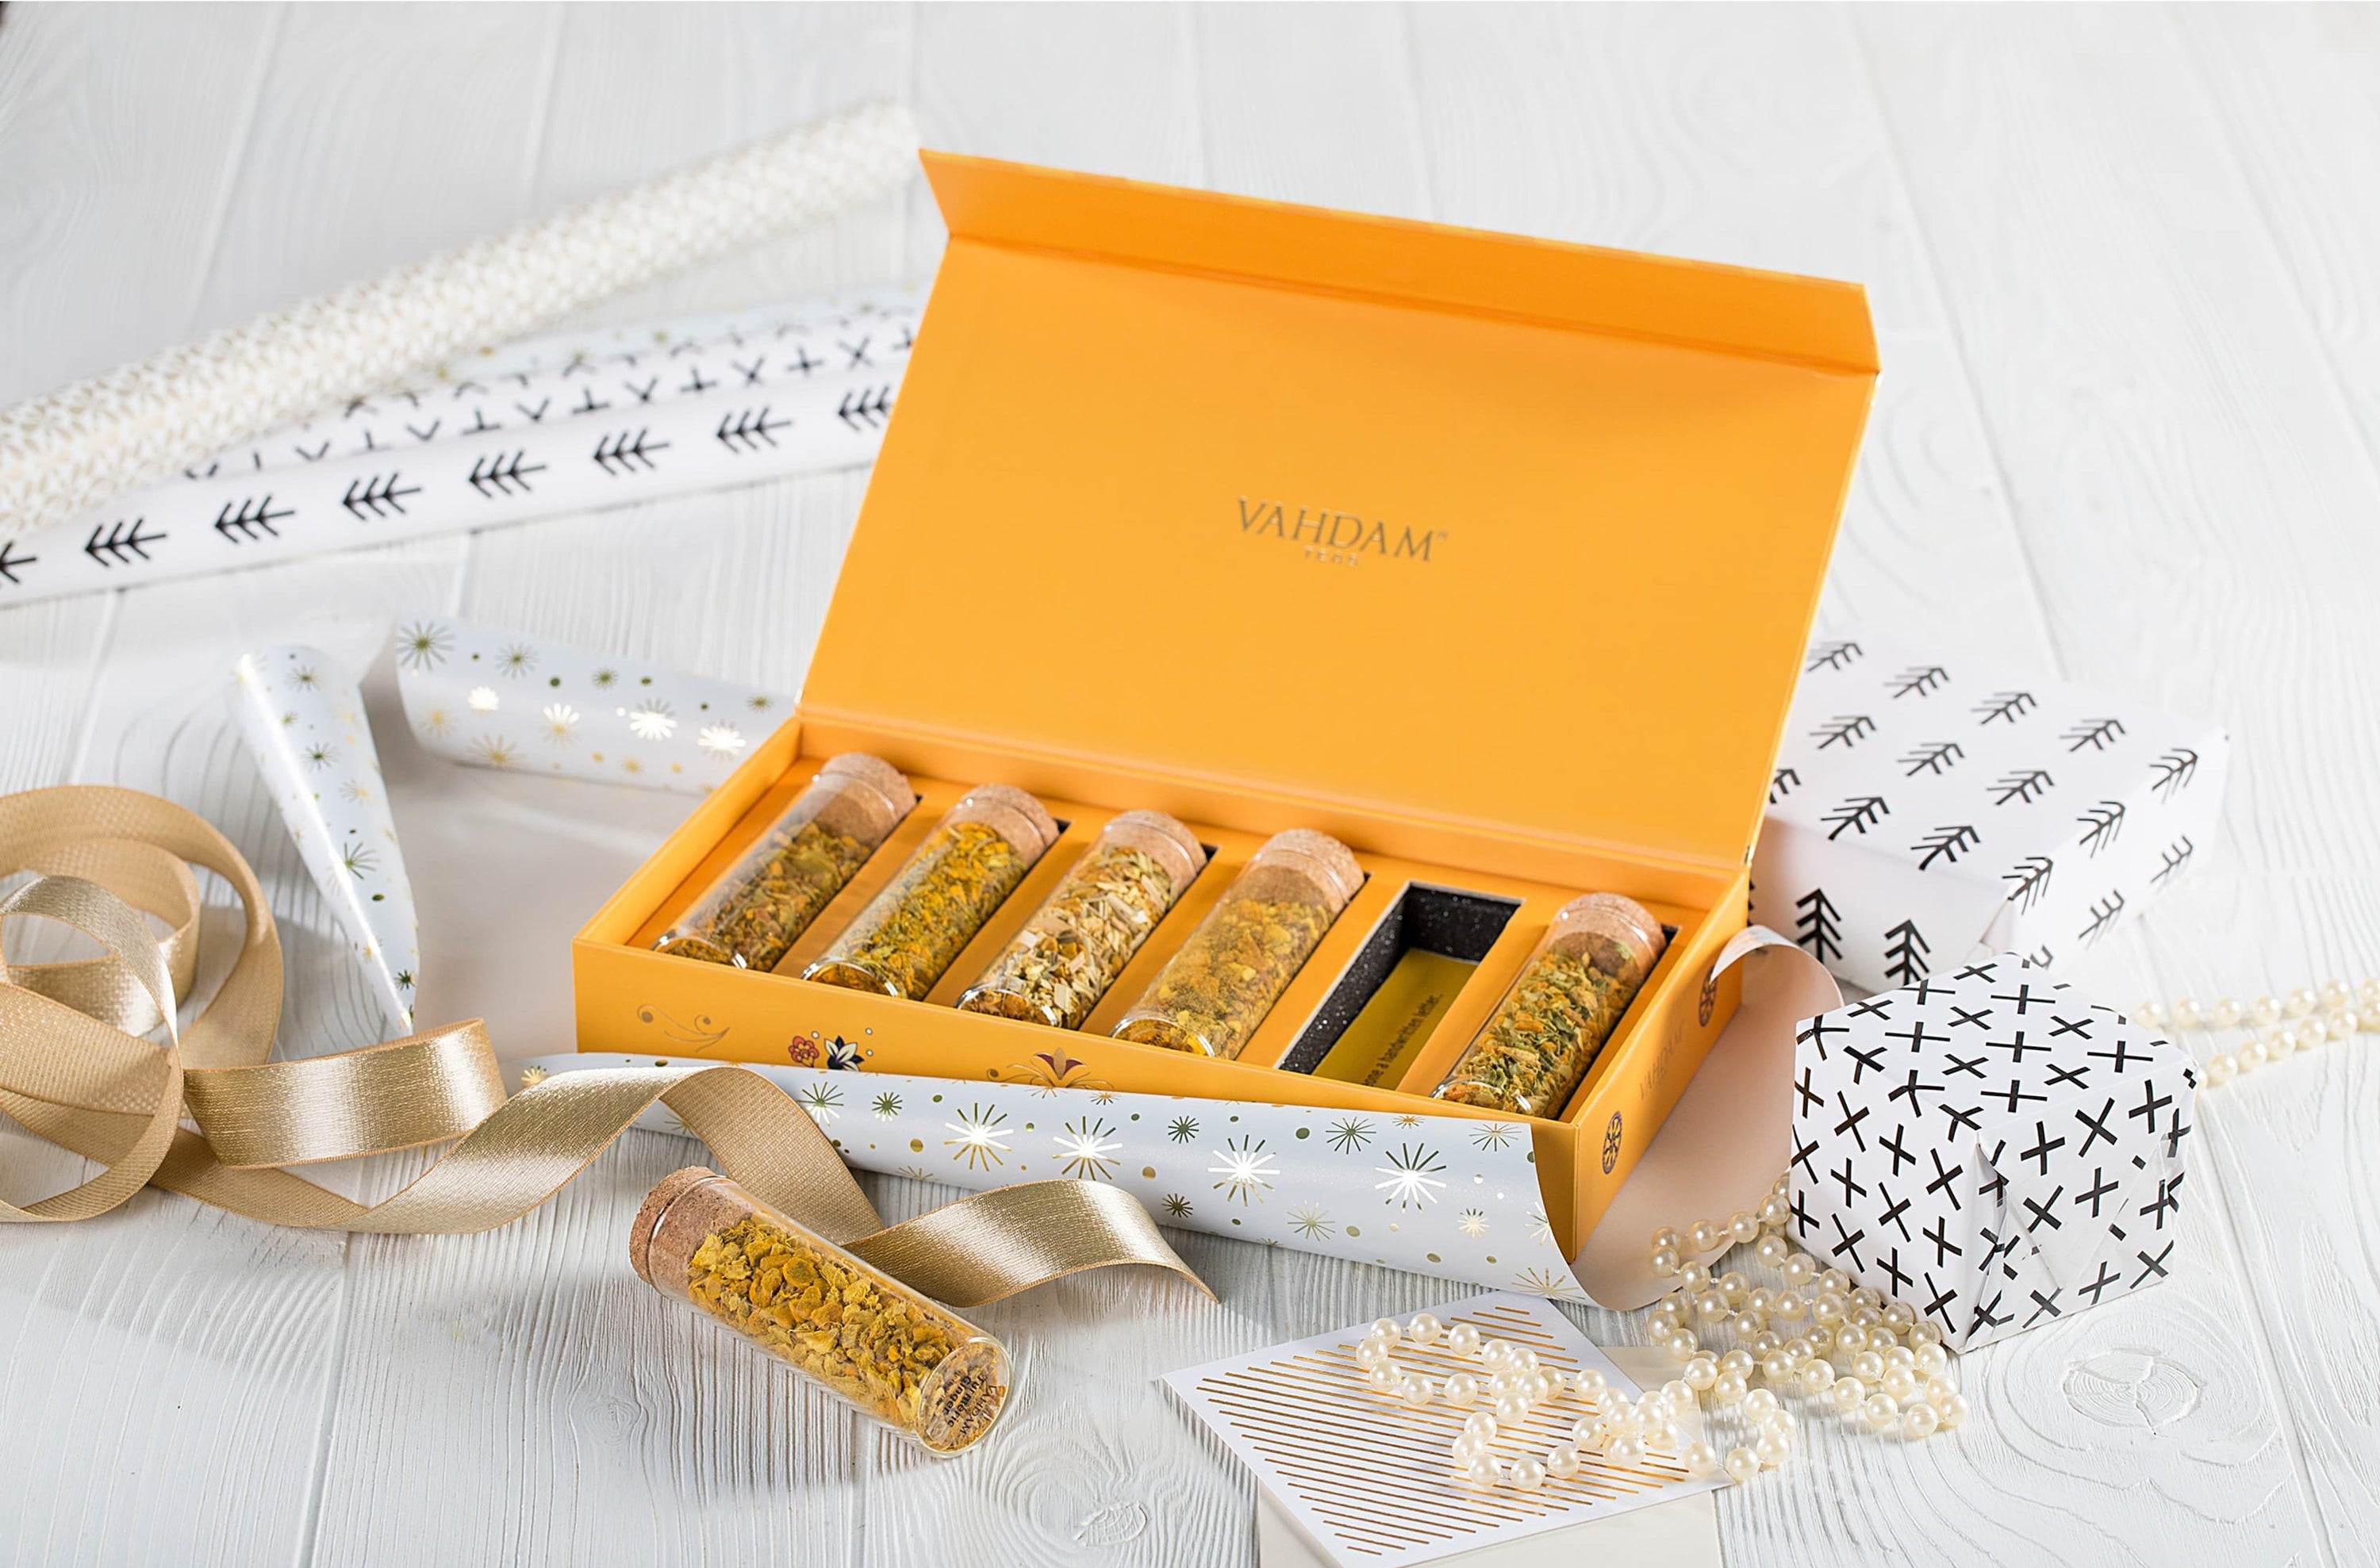 The rectangle-shaped yellow box with six tubes of loose-leaf tea inside